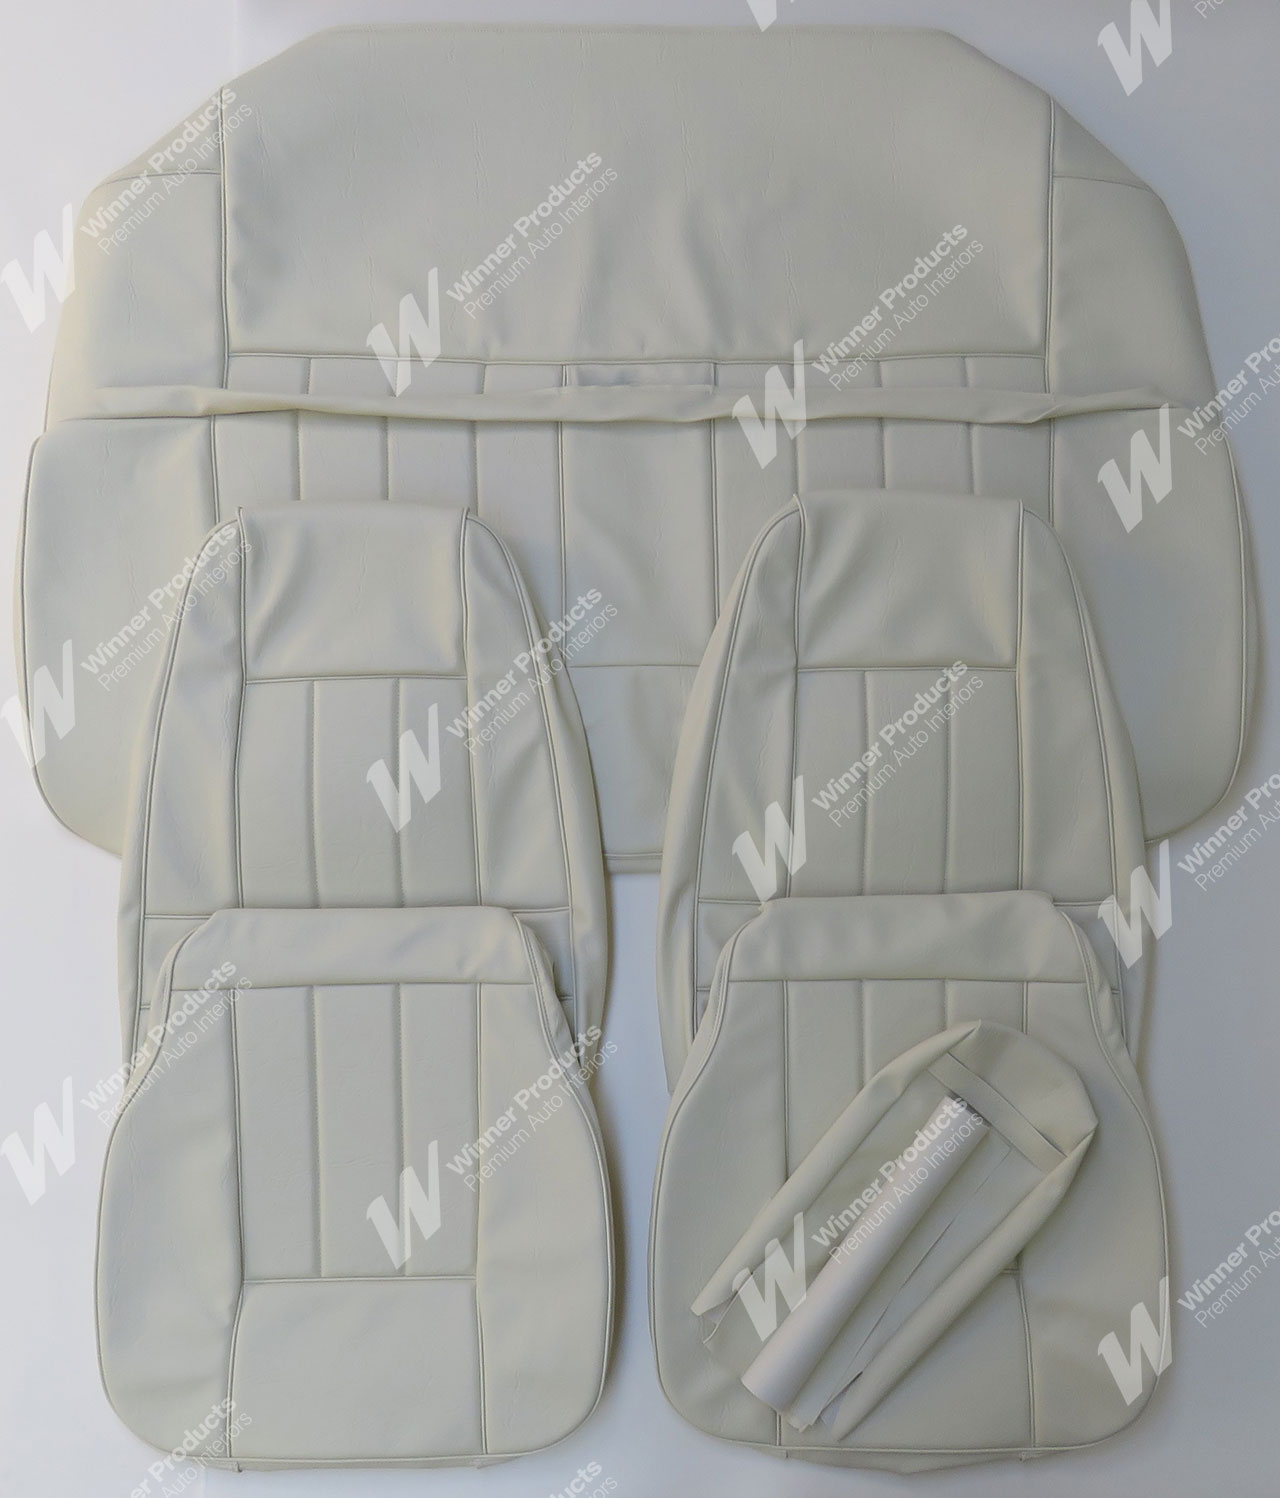 Ford GT XA GT Coupe W White Seat Covers (Image 1 of 7)